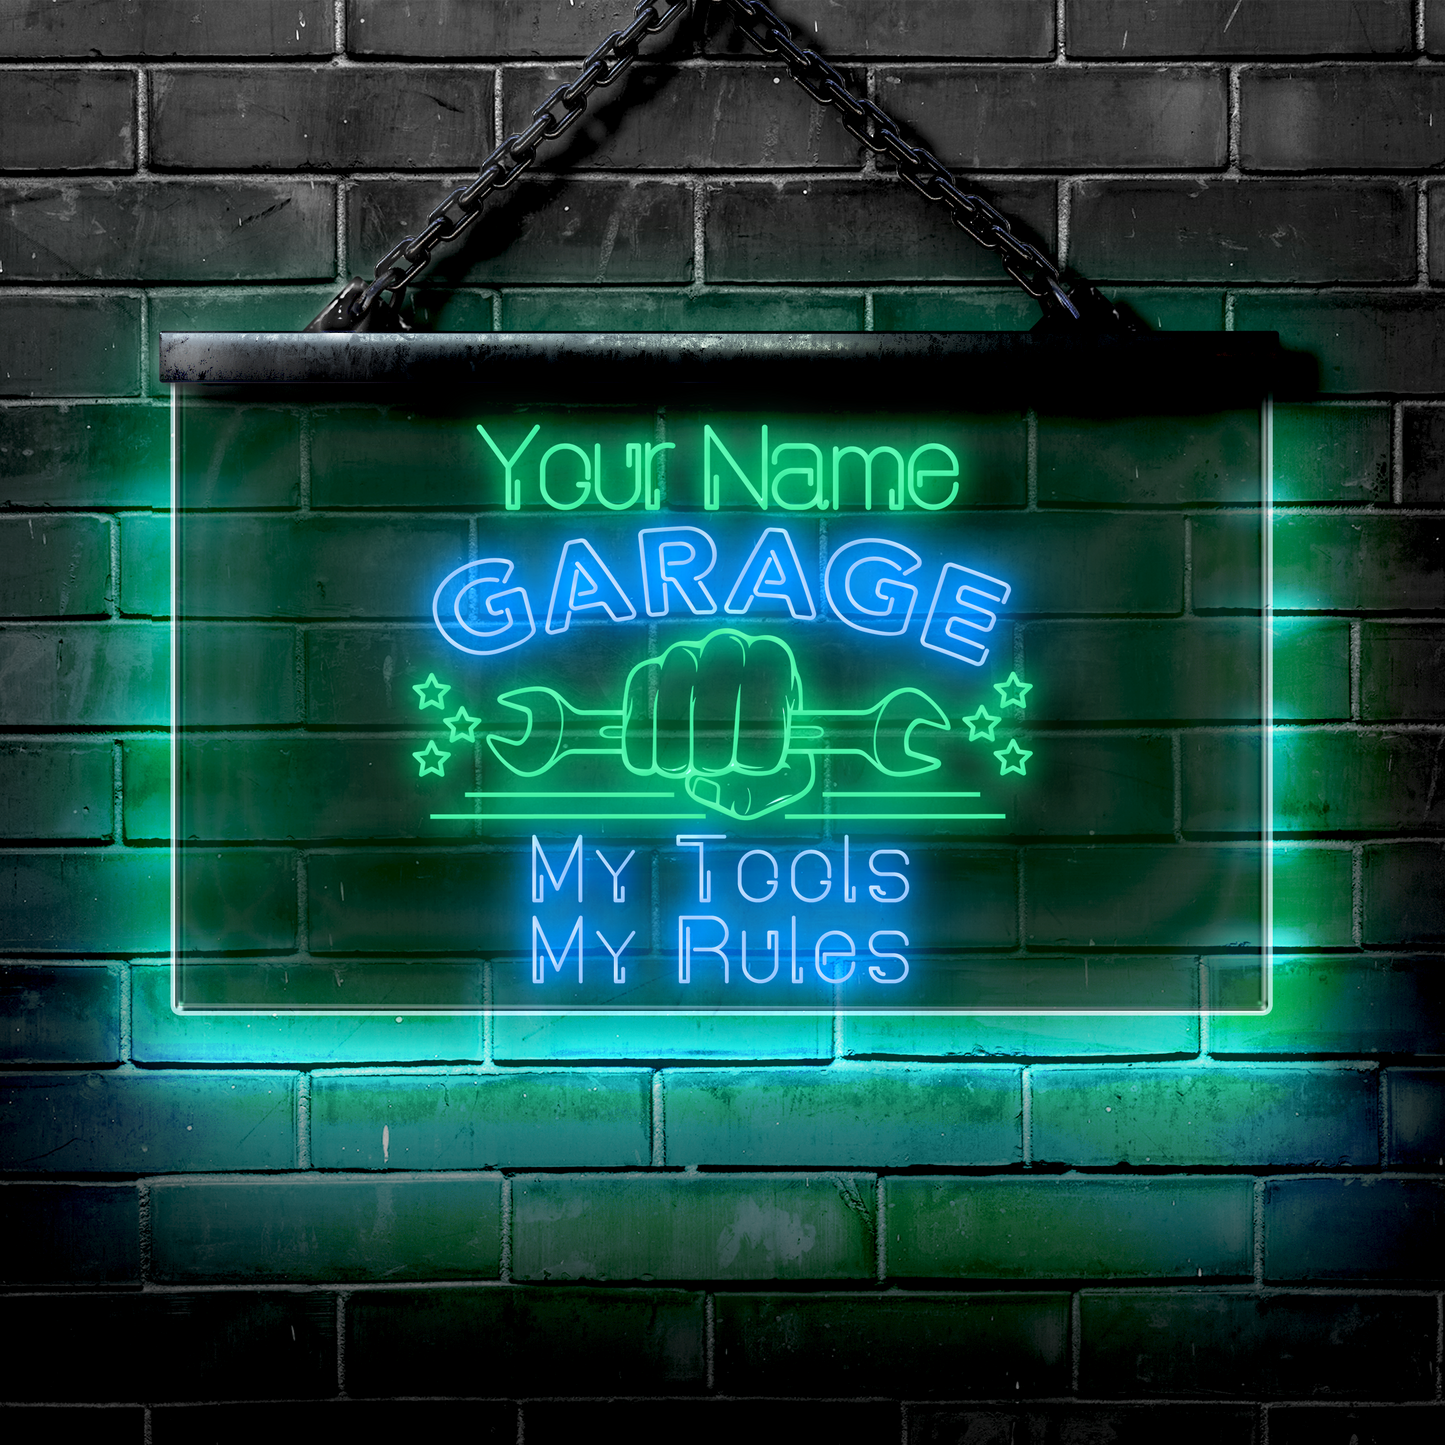 Personalized LED Garage Sign: My Tools My Rules